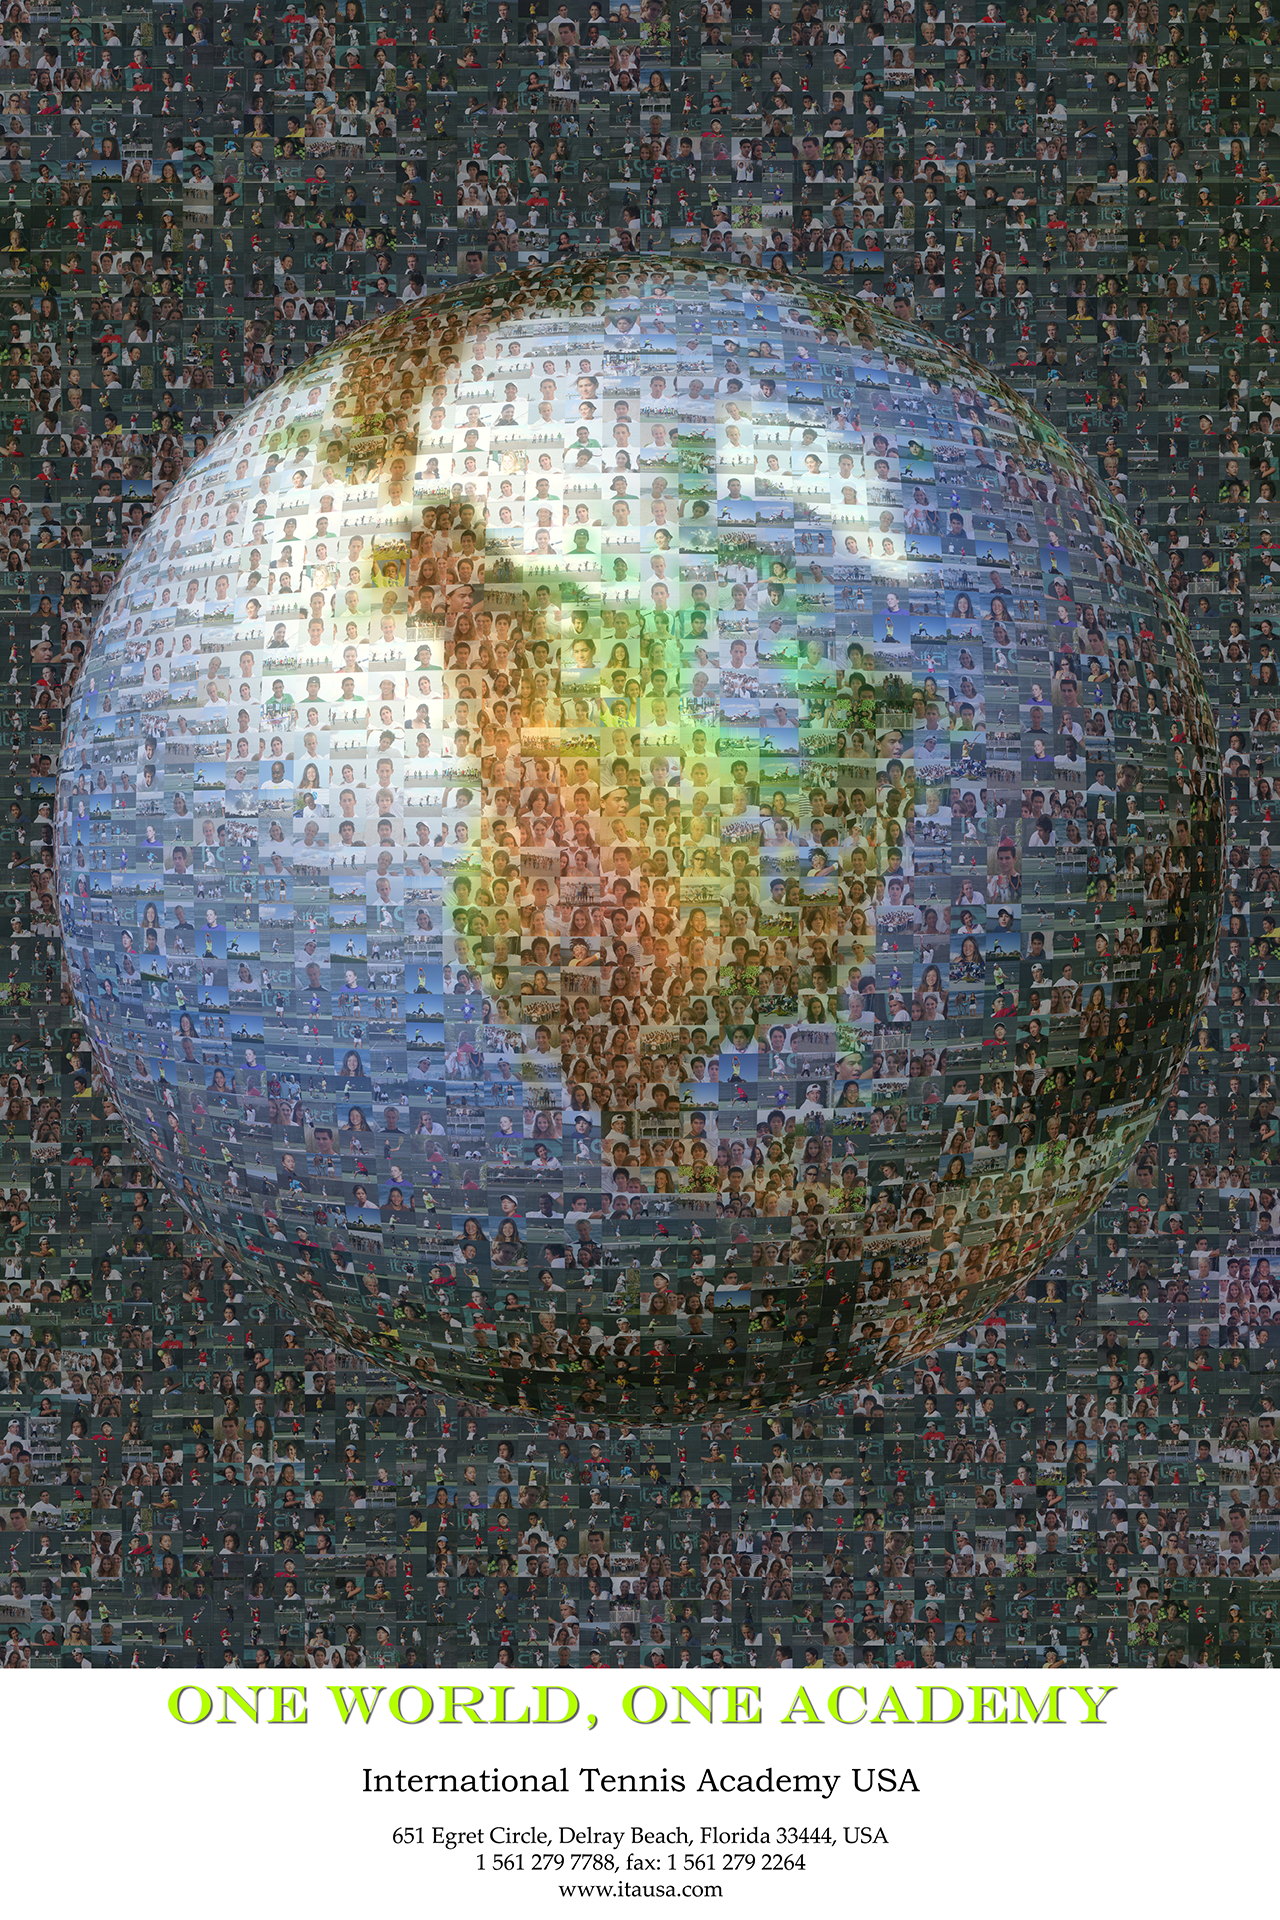 photo mosaic Using our face cropping technology we were able to triple the number of photo from 250 to 750 to create this 3D Earth Mosaic